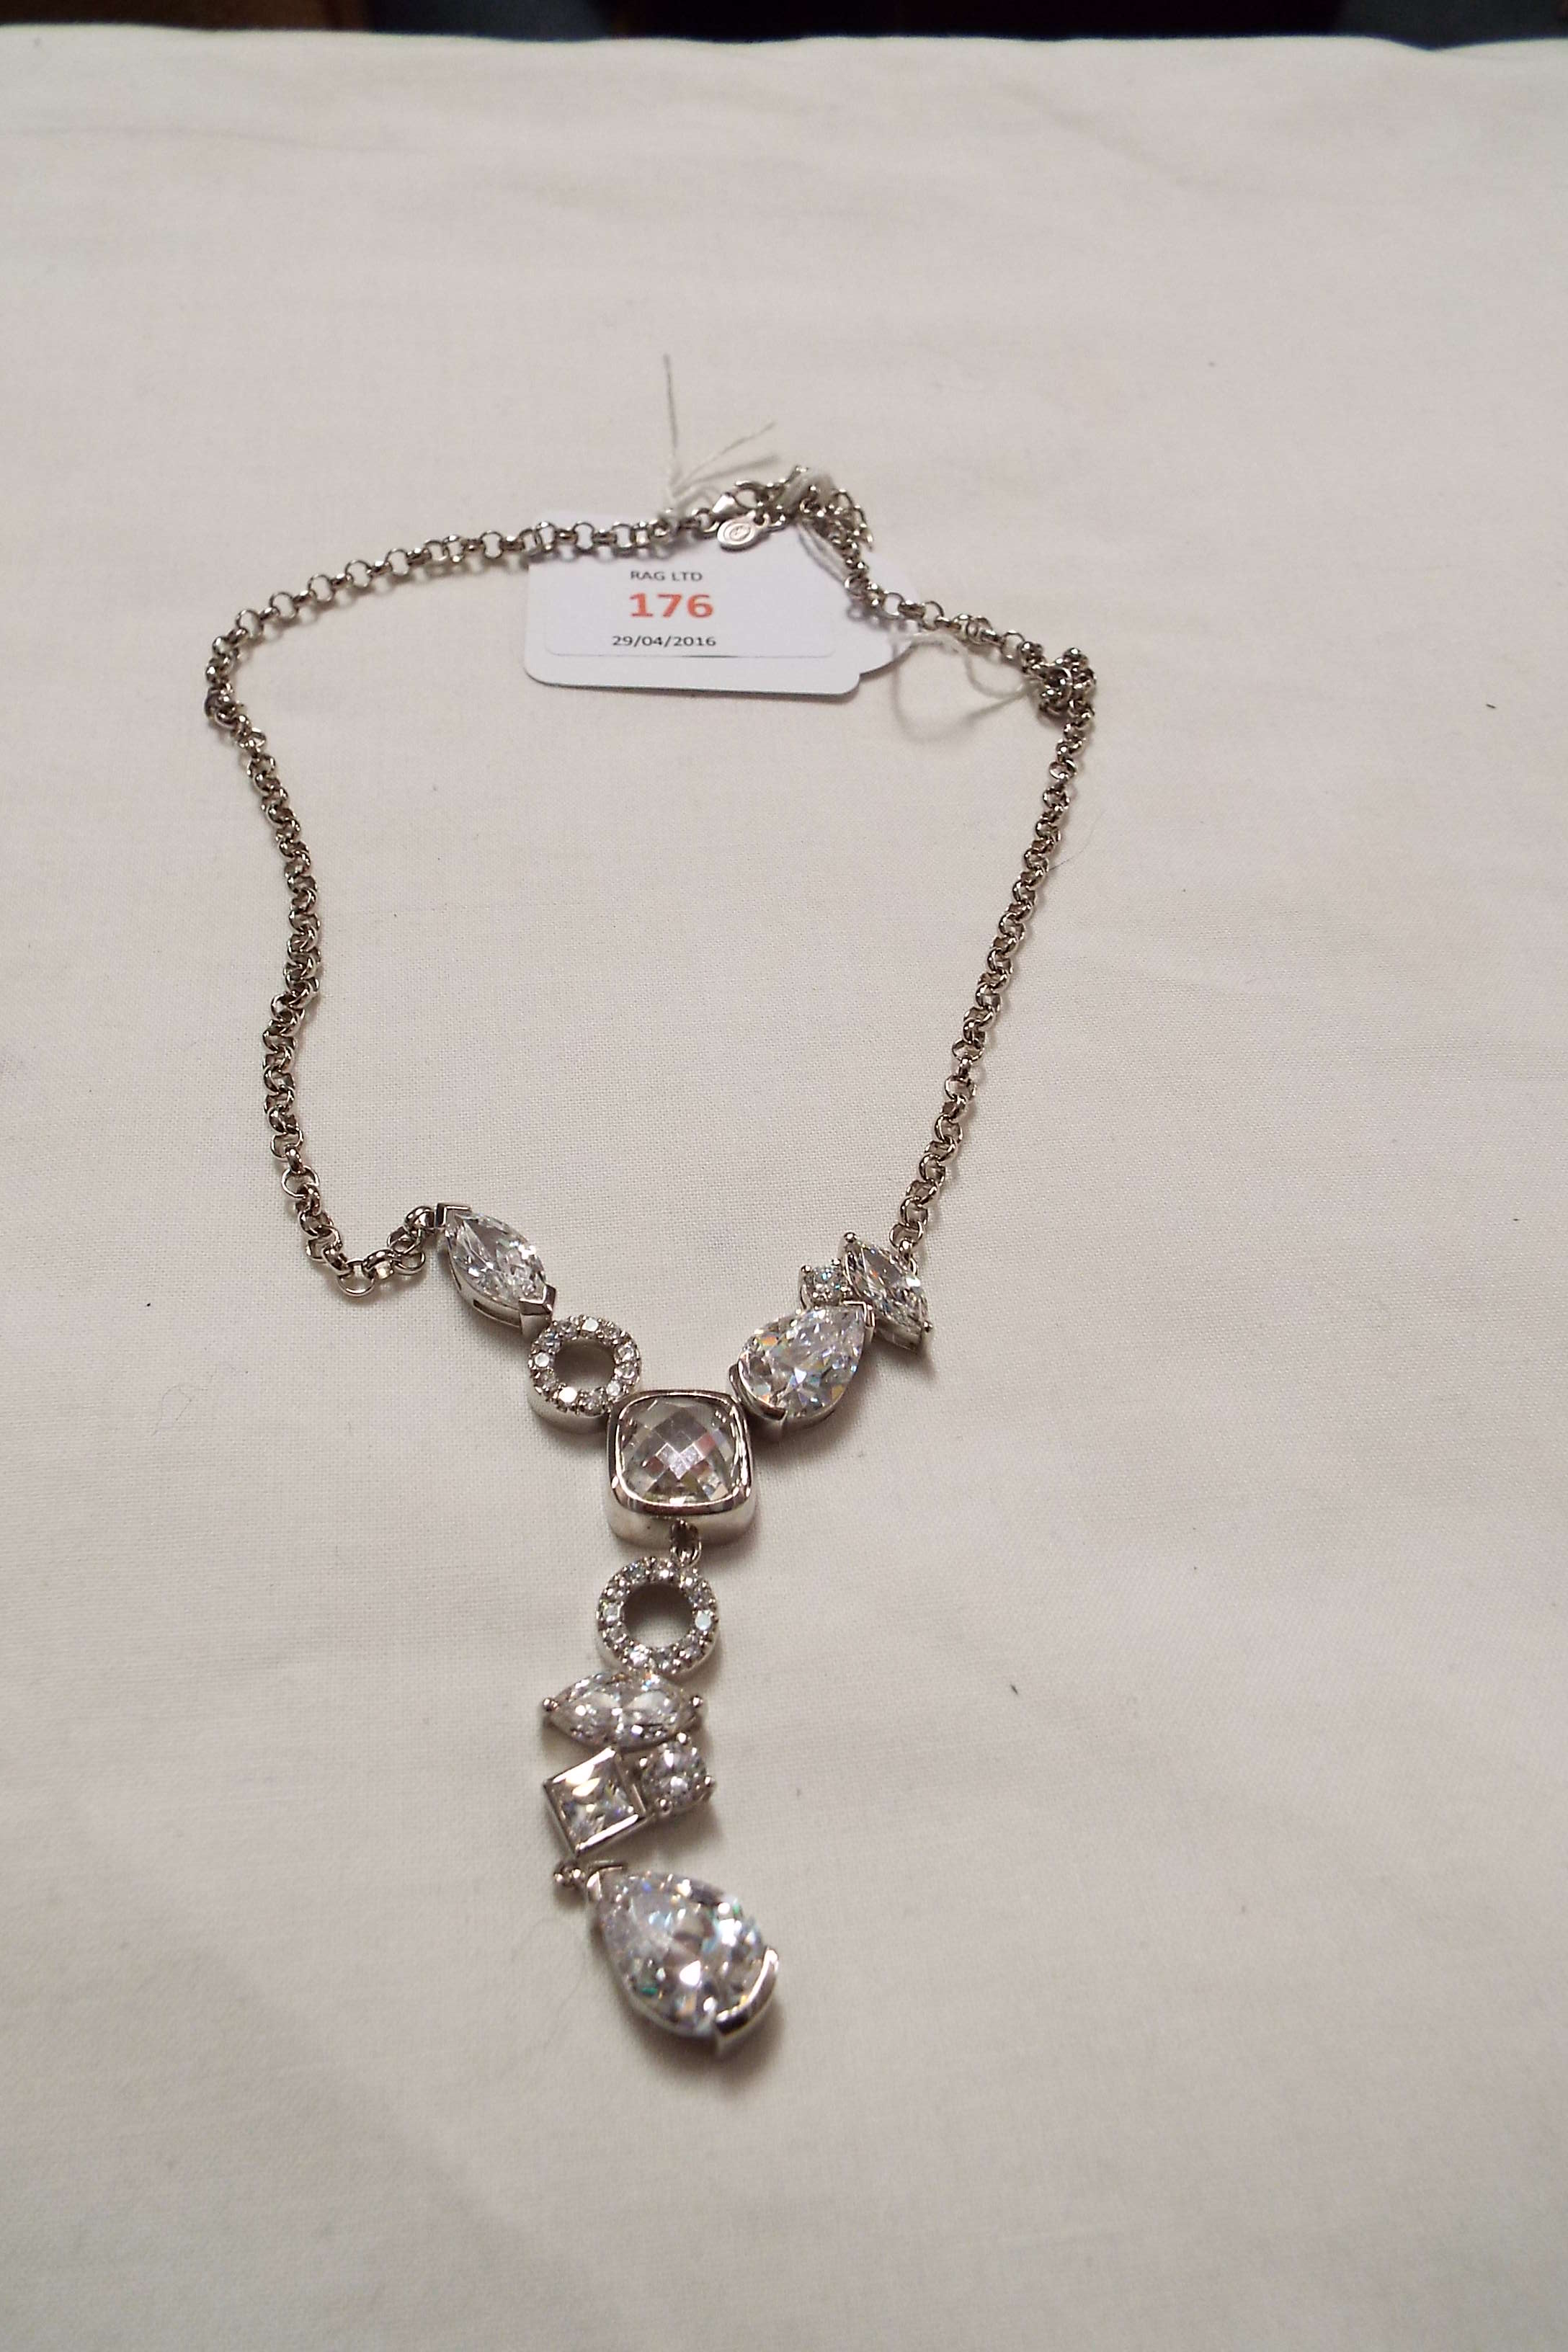 A silver belcher chain with contemporary clear stone lavalier